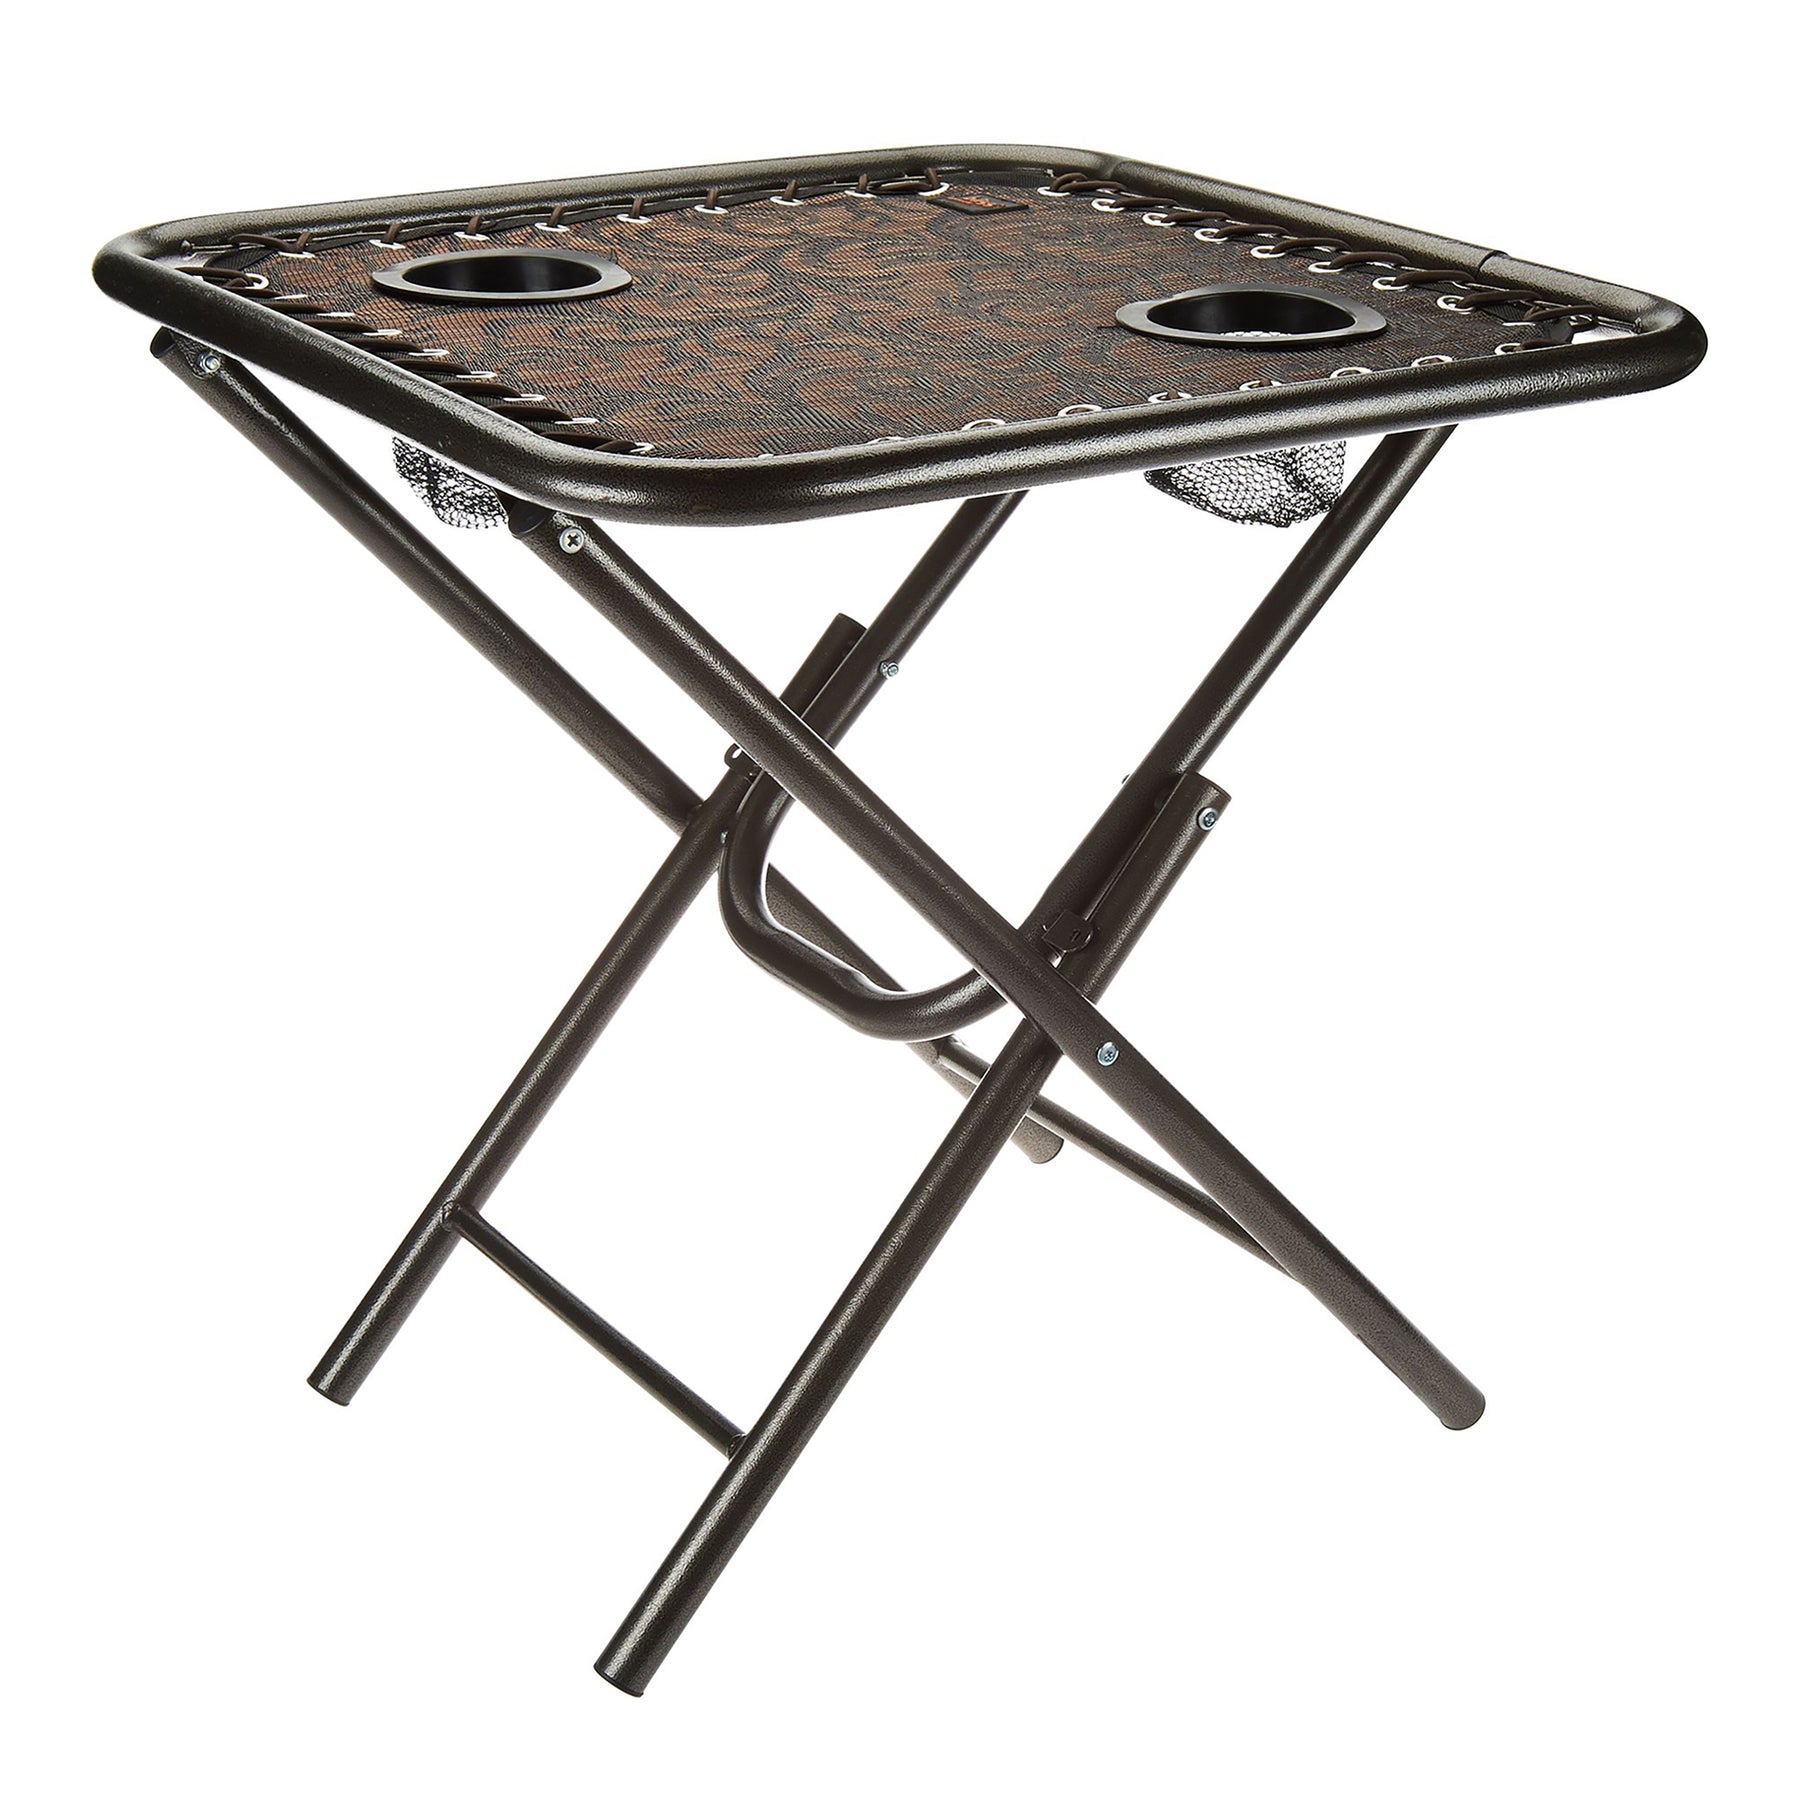 Angled view of the Bliss Hammocks 20-inch Folding Side Table with 2 Built-In Cup Holders in the brown jacquard variation.